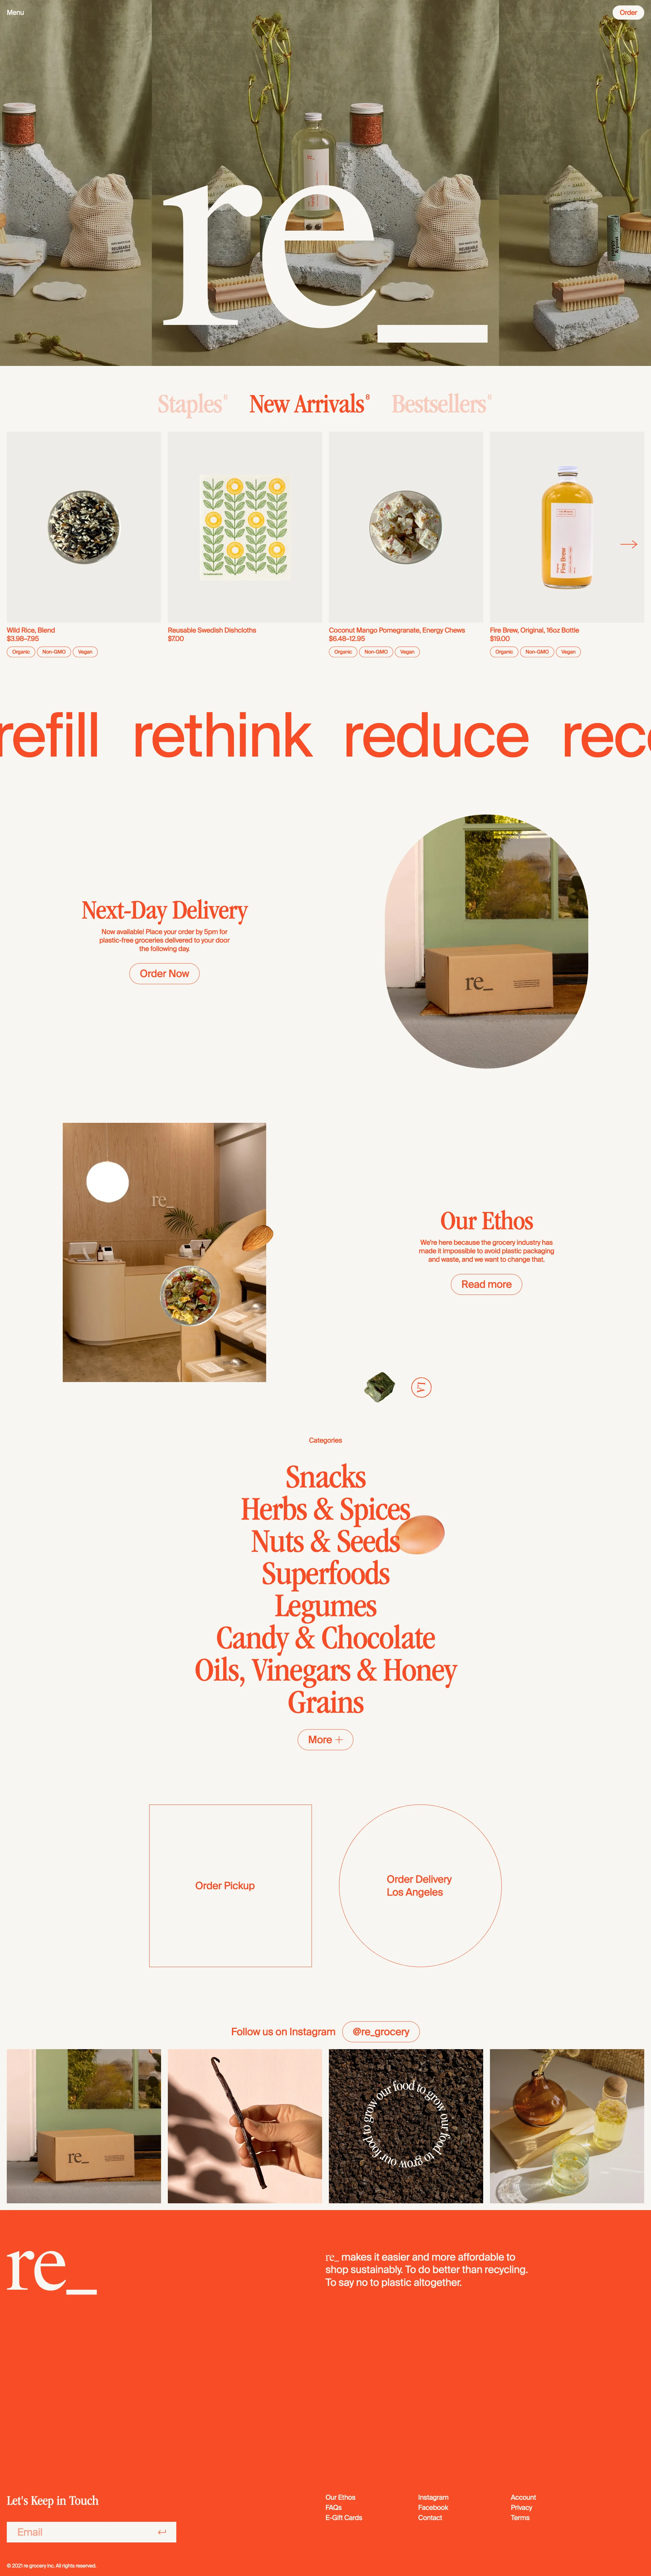 re_ Landing Page Example: re_ is a package-free grocery store located in Los Angeles. We make it easier and more affordable to shop sustainably. To do better than recycling. To say no to plastic altogether.